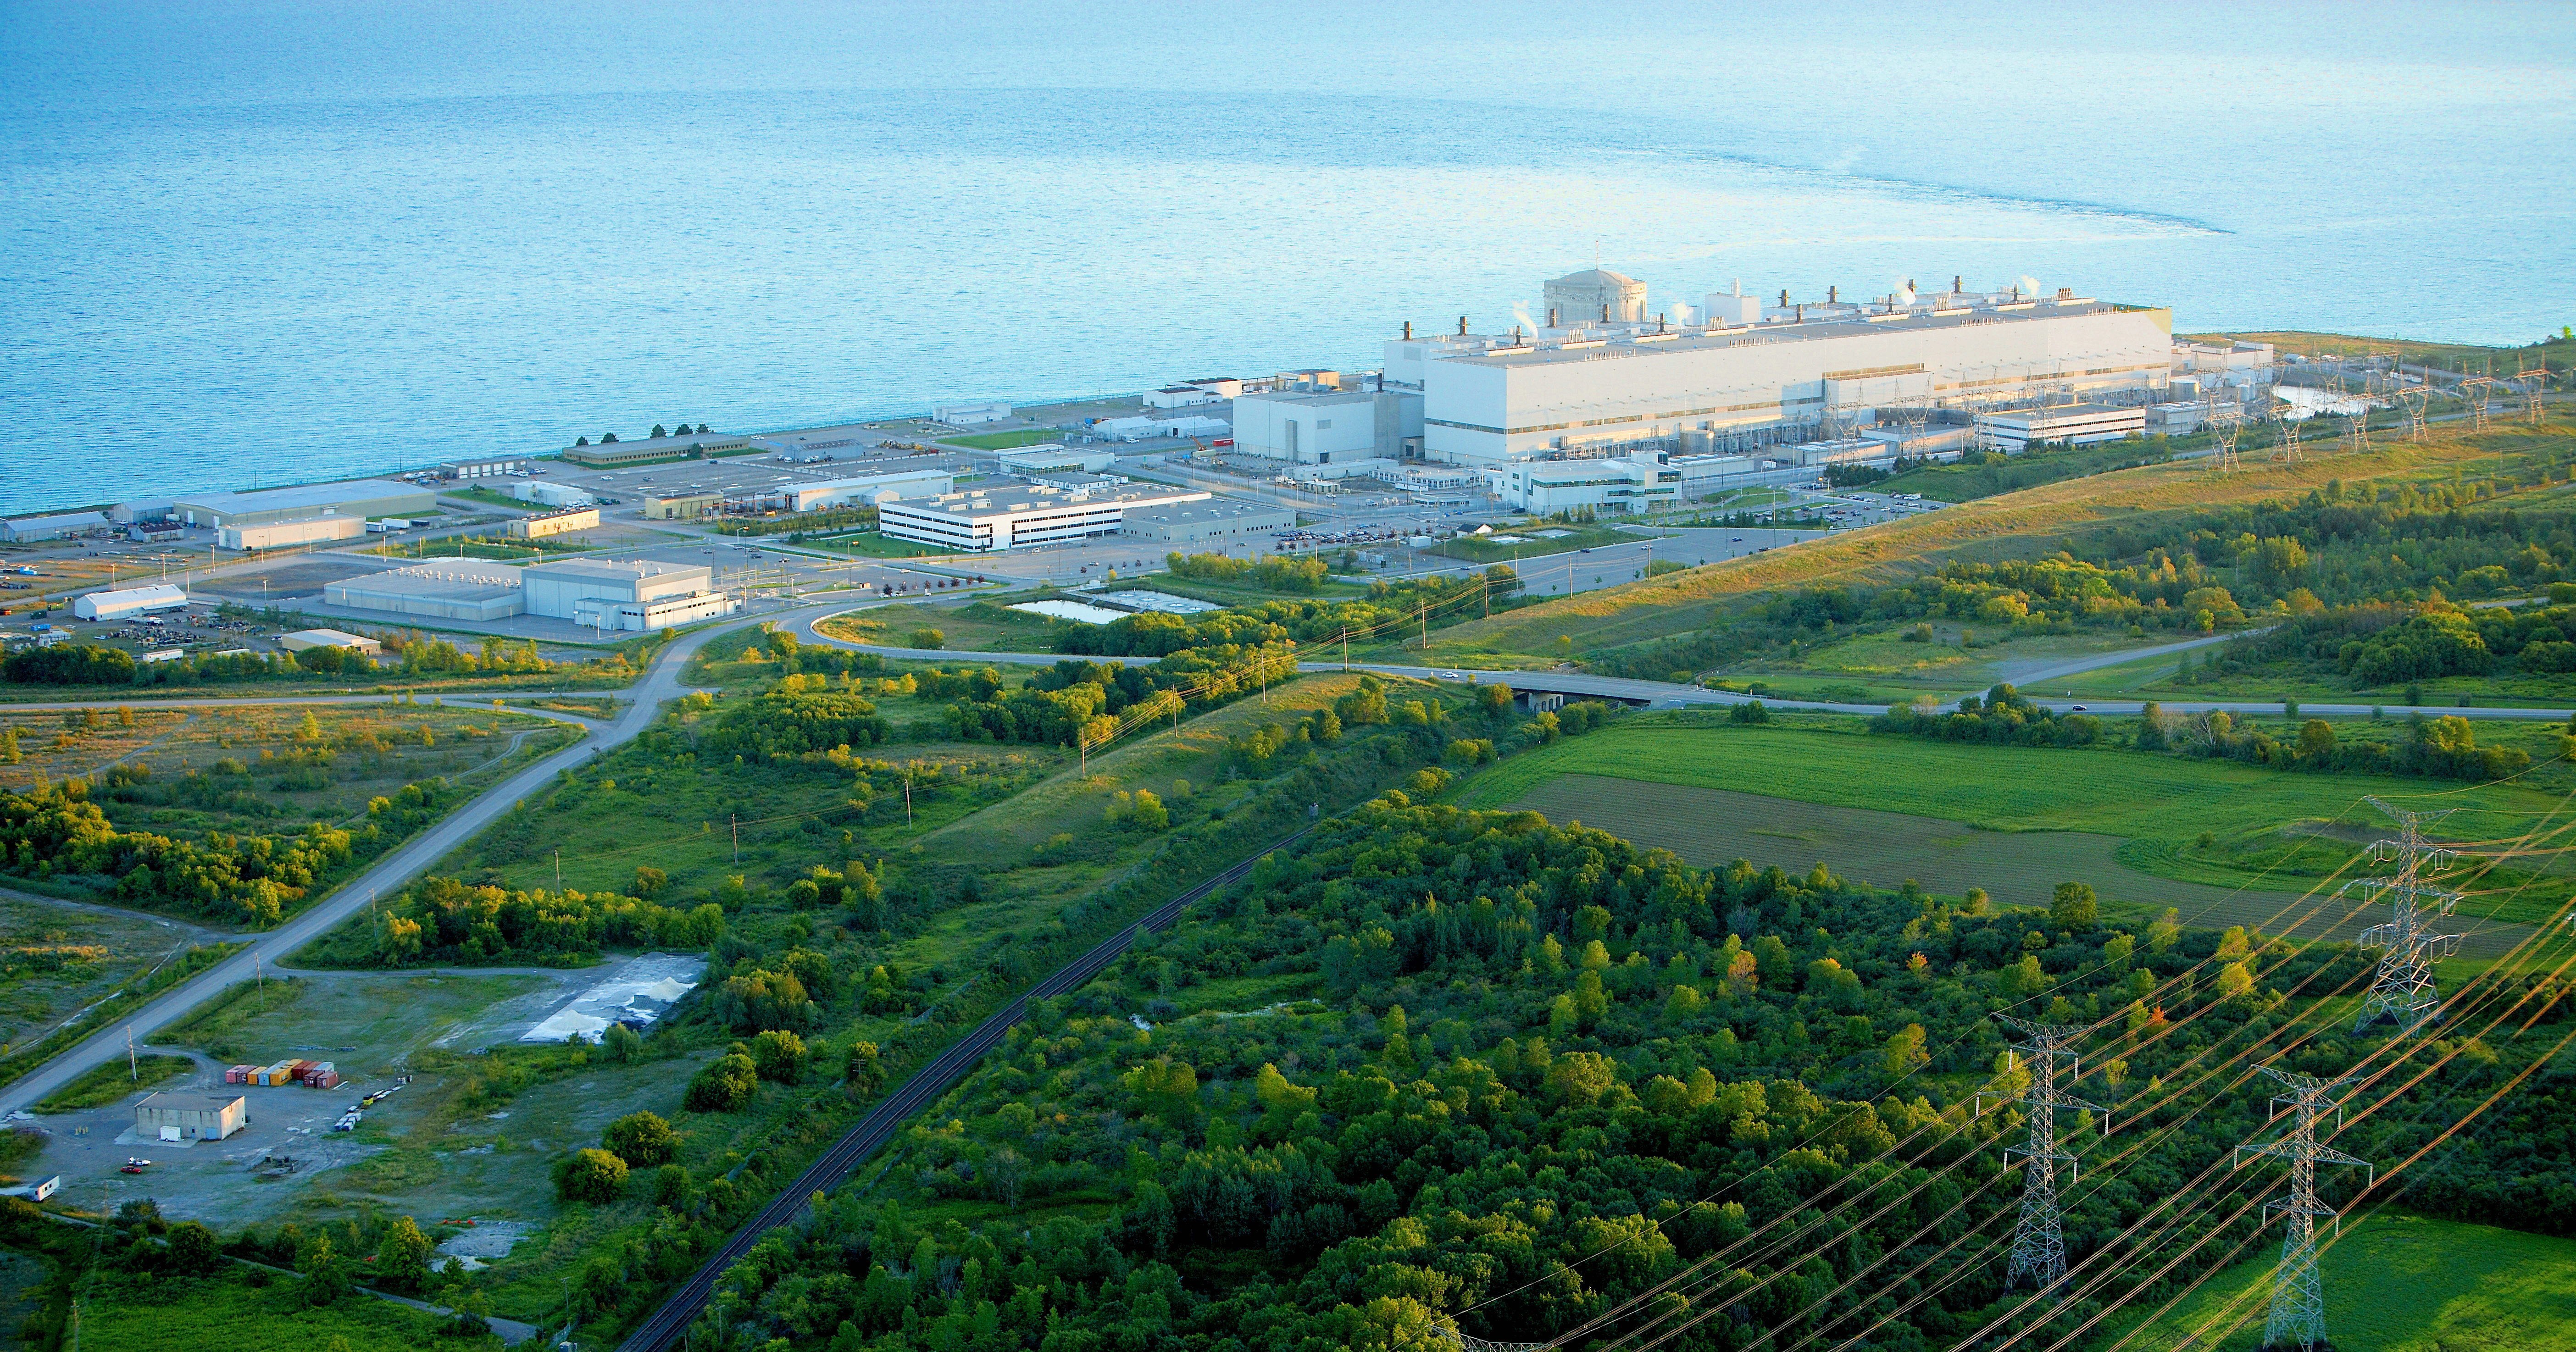 An aerial view of Darlington Nuclear Generating Station.